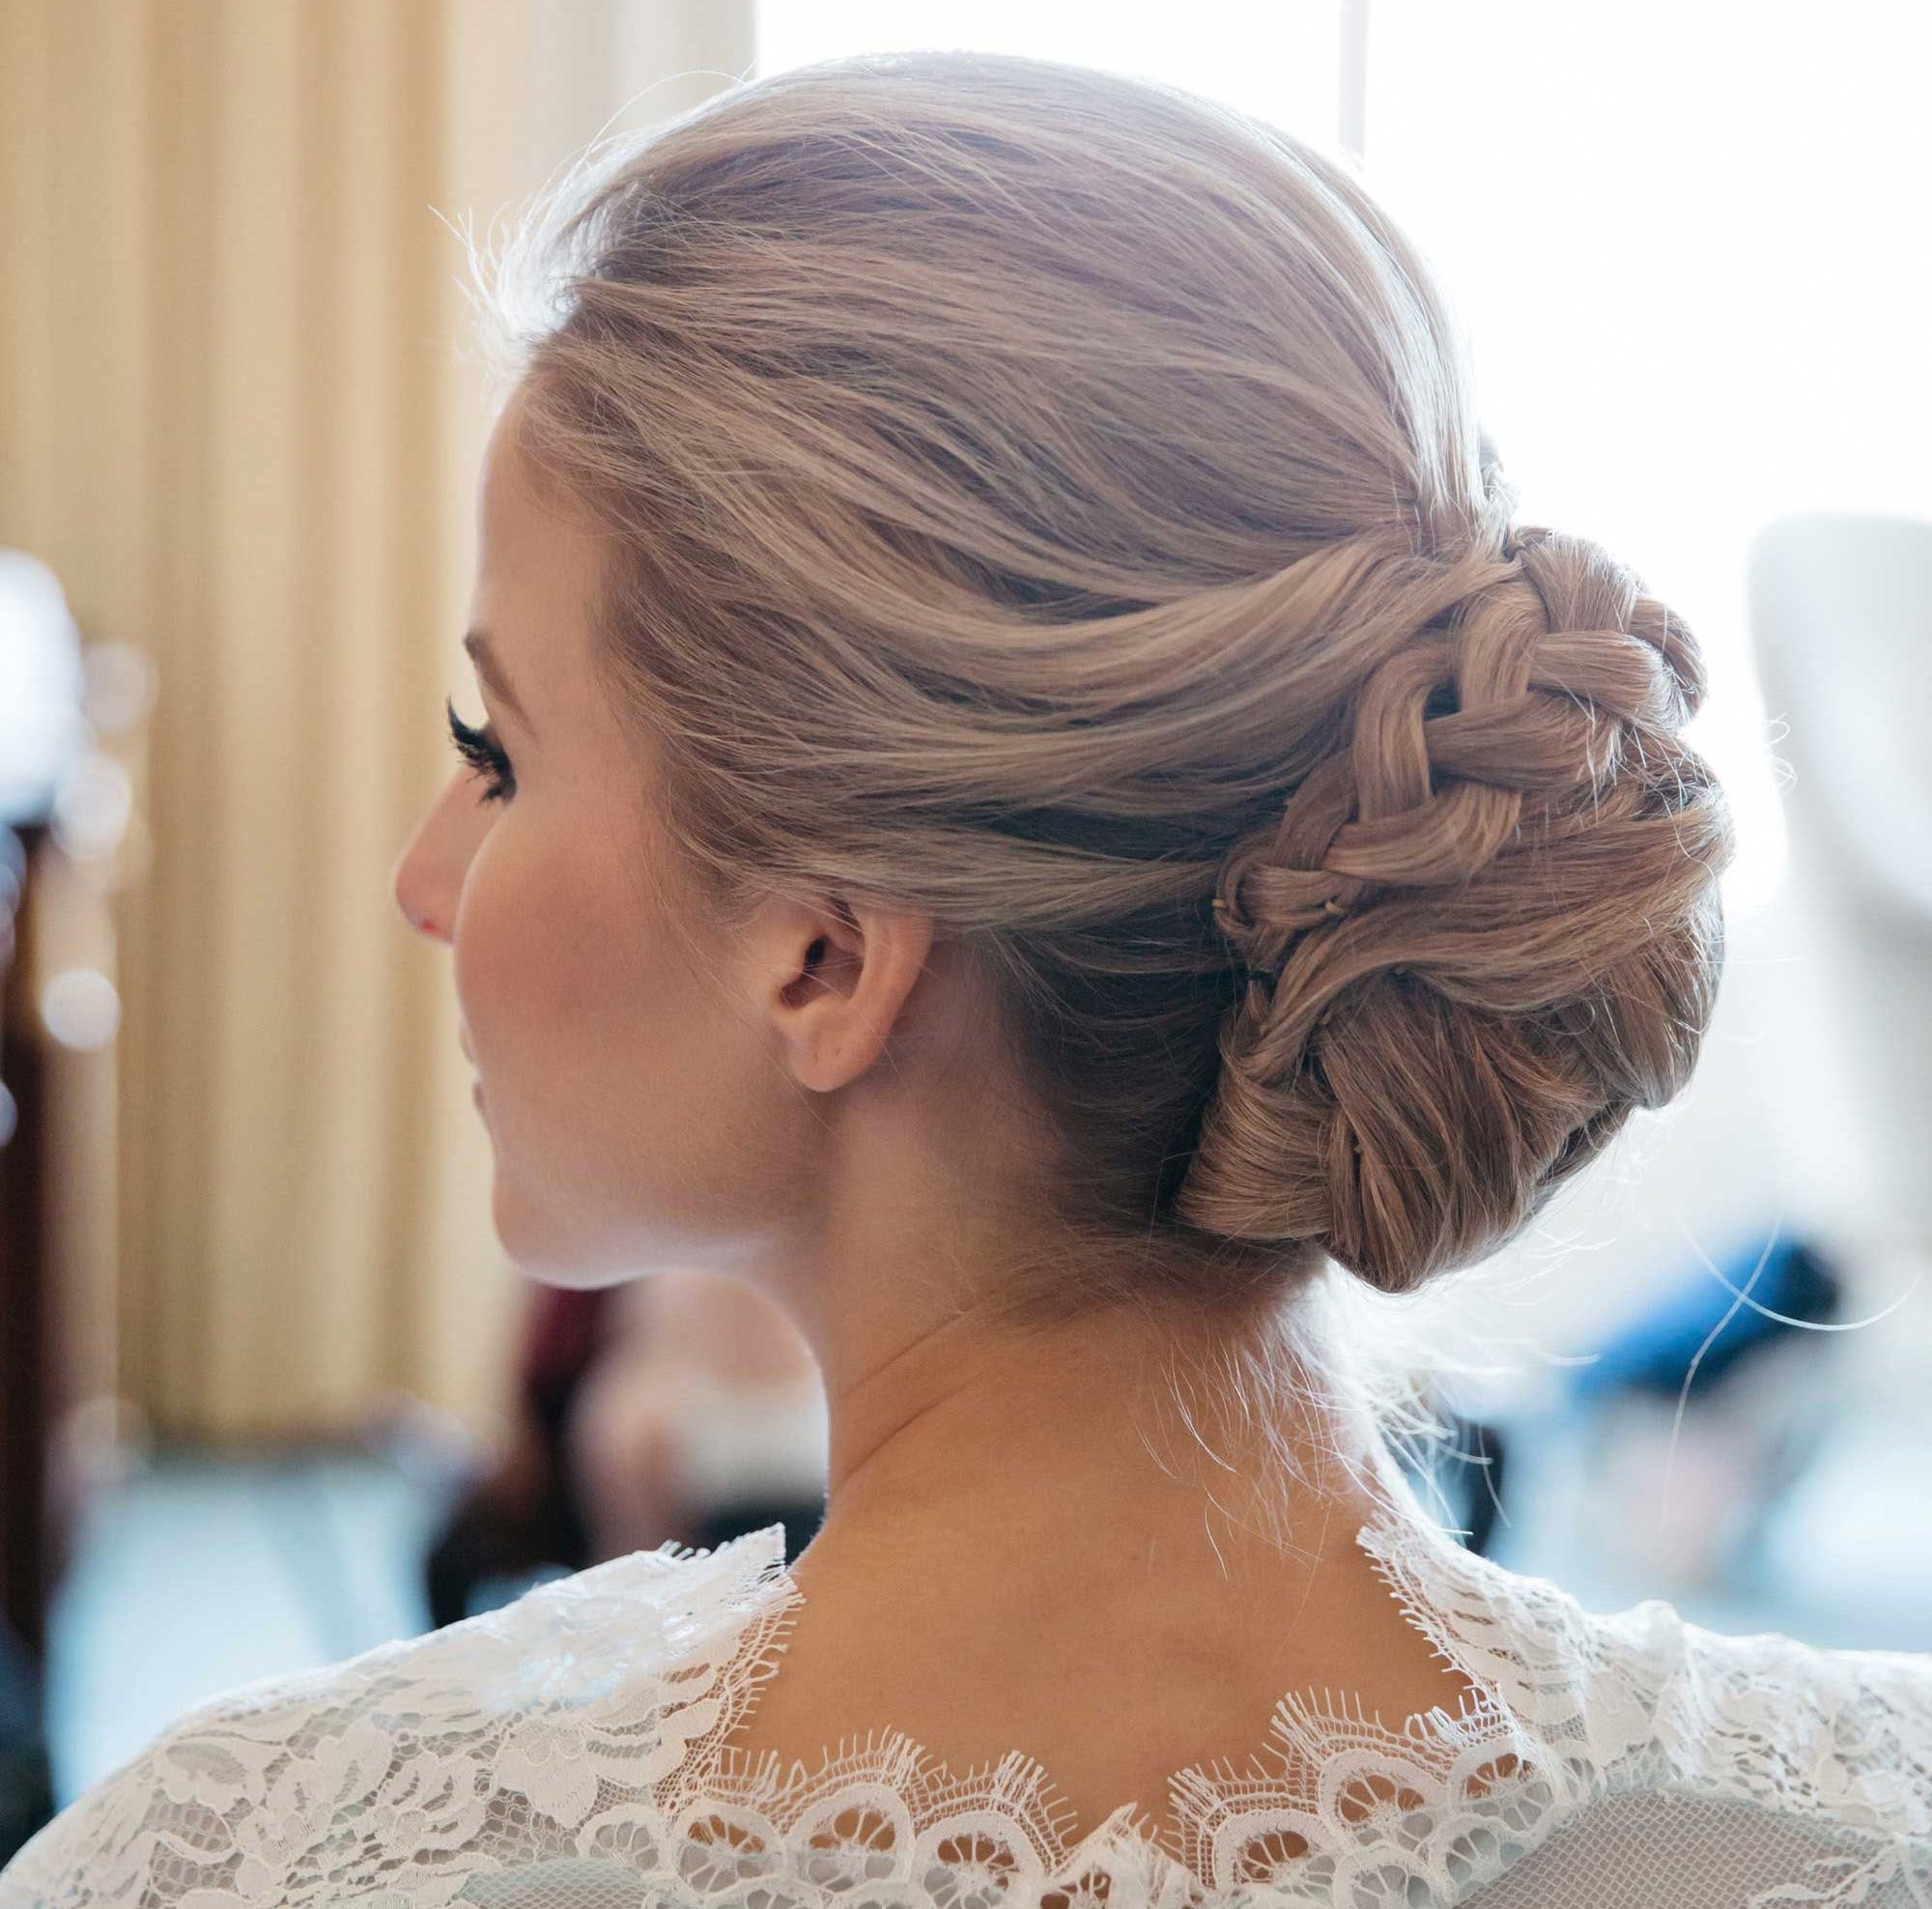 Braided Hairstyles: 5 Ideas For Your Wedding Look – Inside Weddings Inside Well Known Chignon Wedding Hairstyles For Long Hair (View 10 of 15)